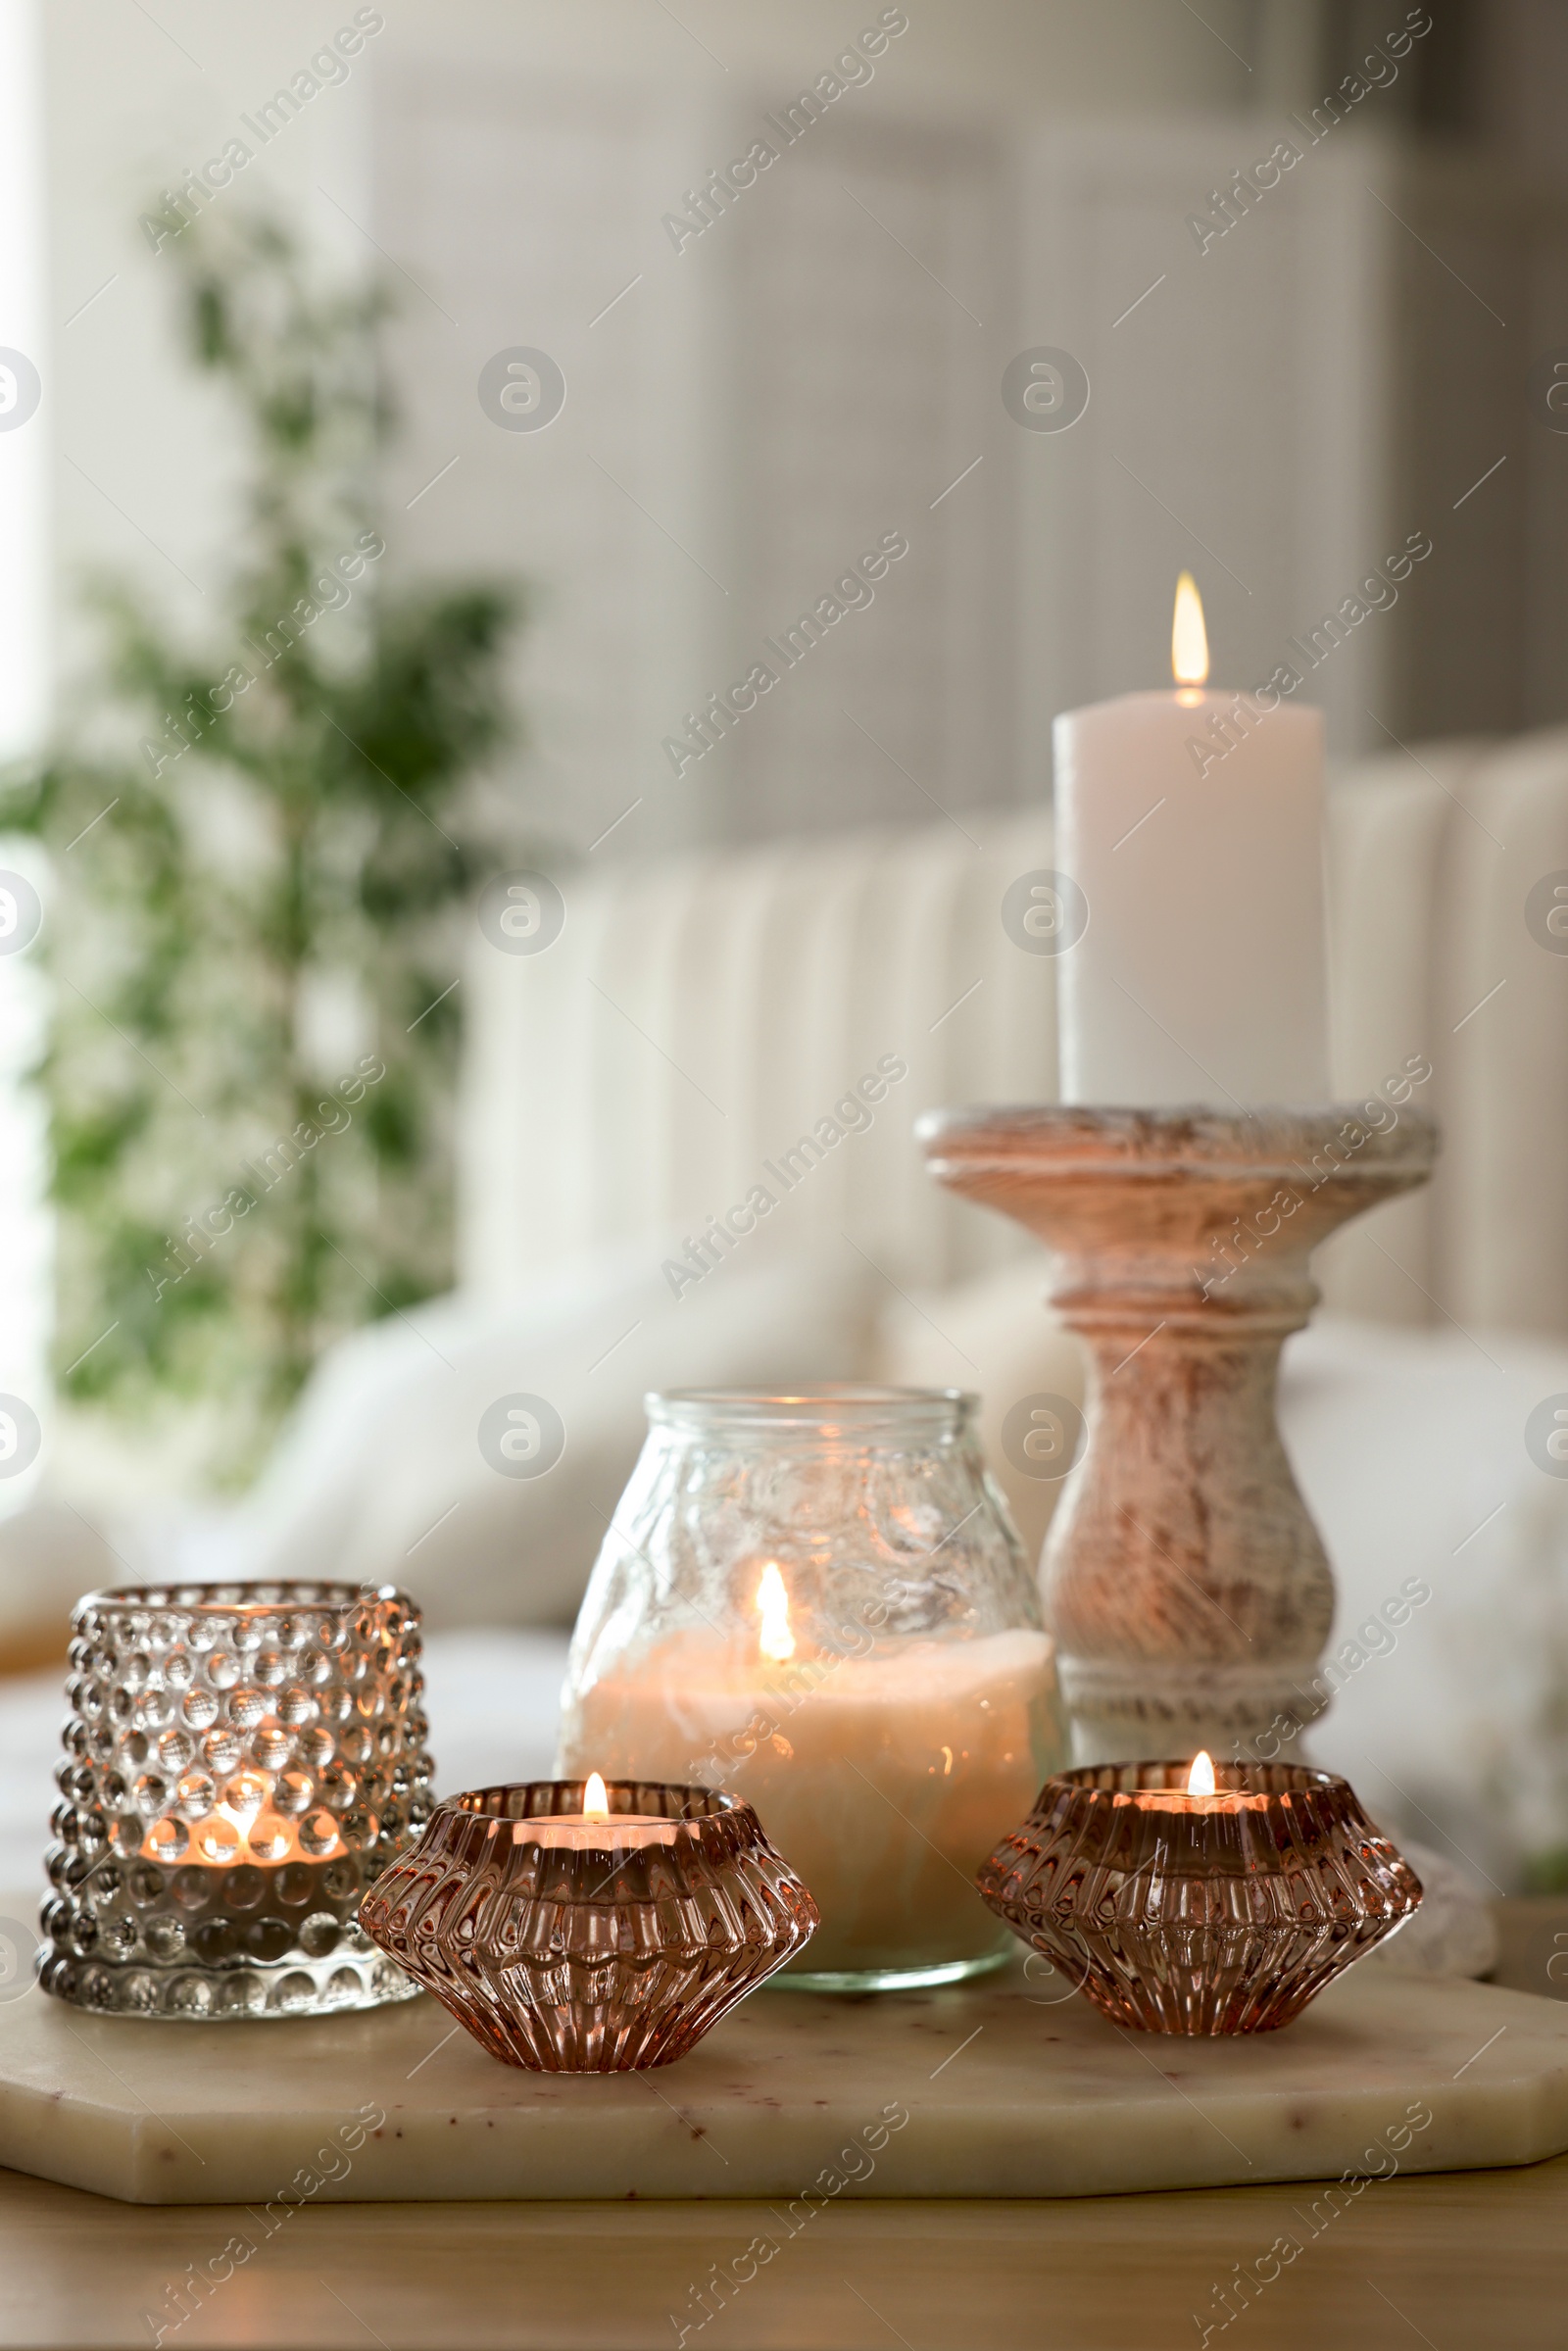 Photo of Set of scented candles and candlestick on wooden table in room